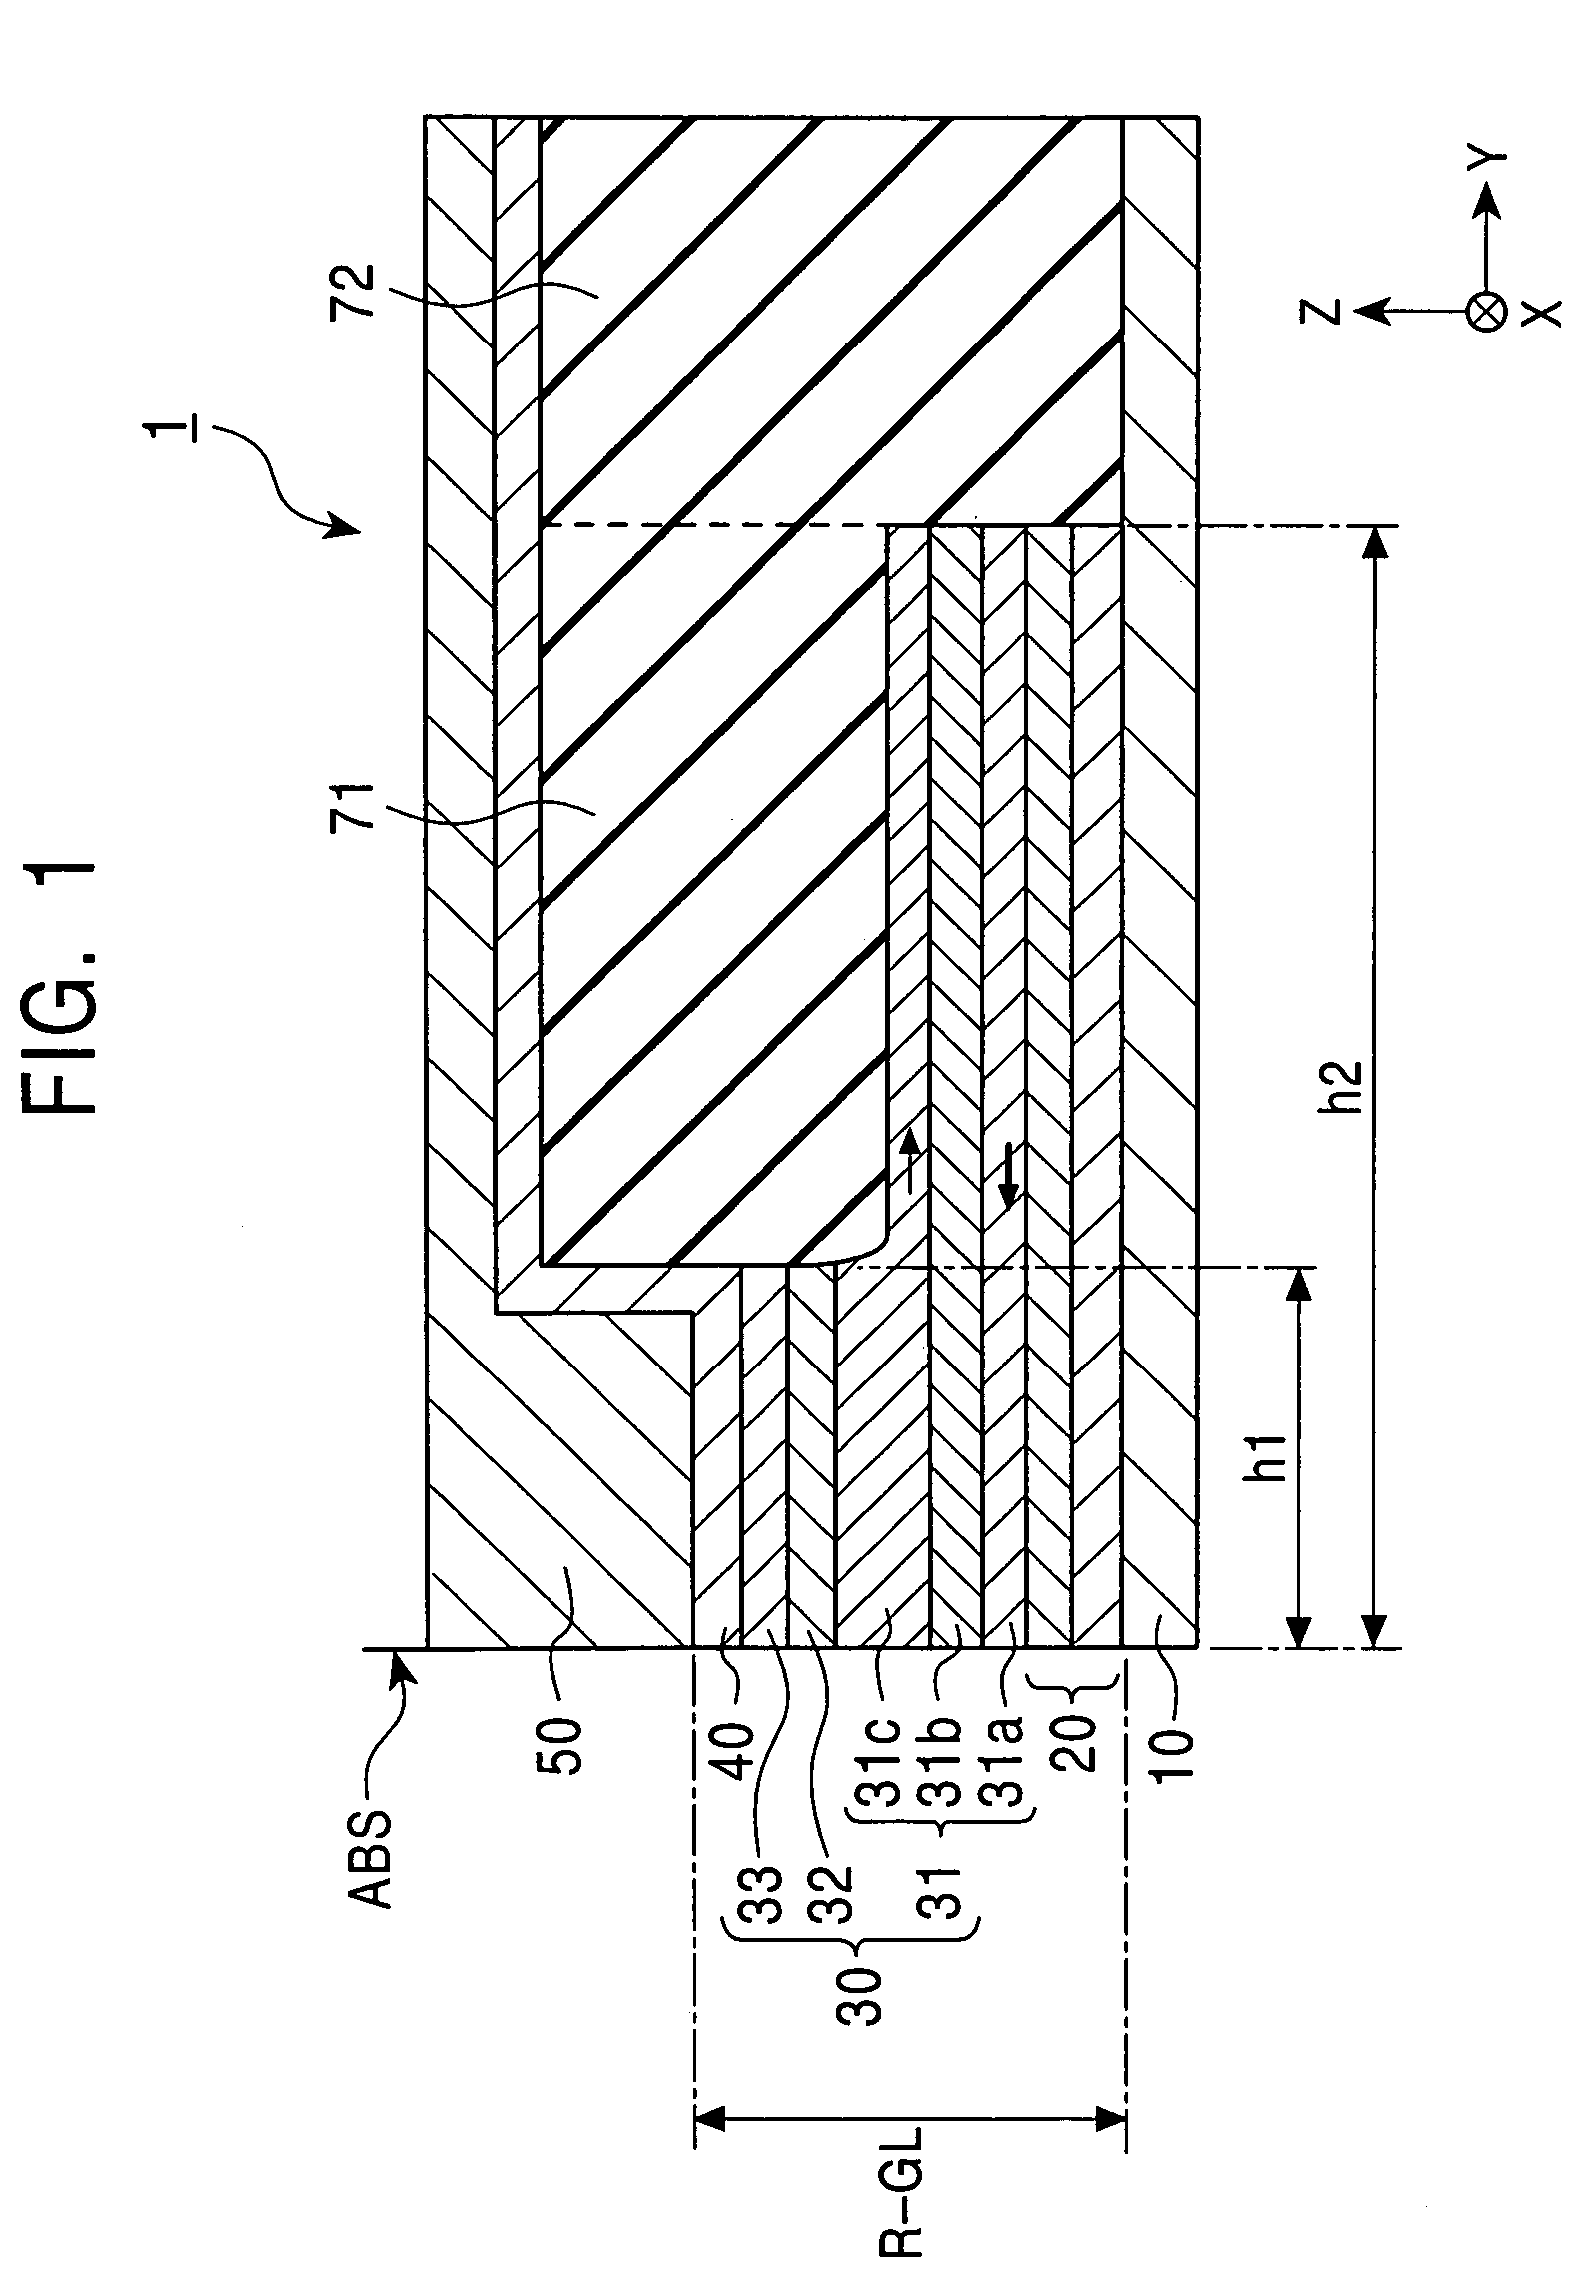 Self-pinned CPP giant magnetoresistive head with antiferromagnetic film absent from current path